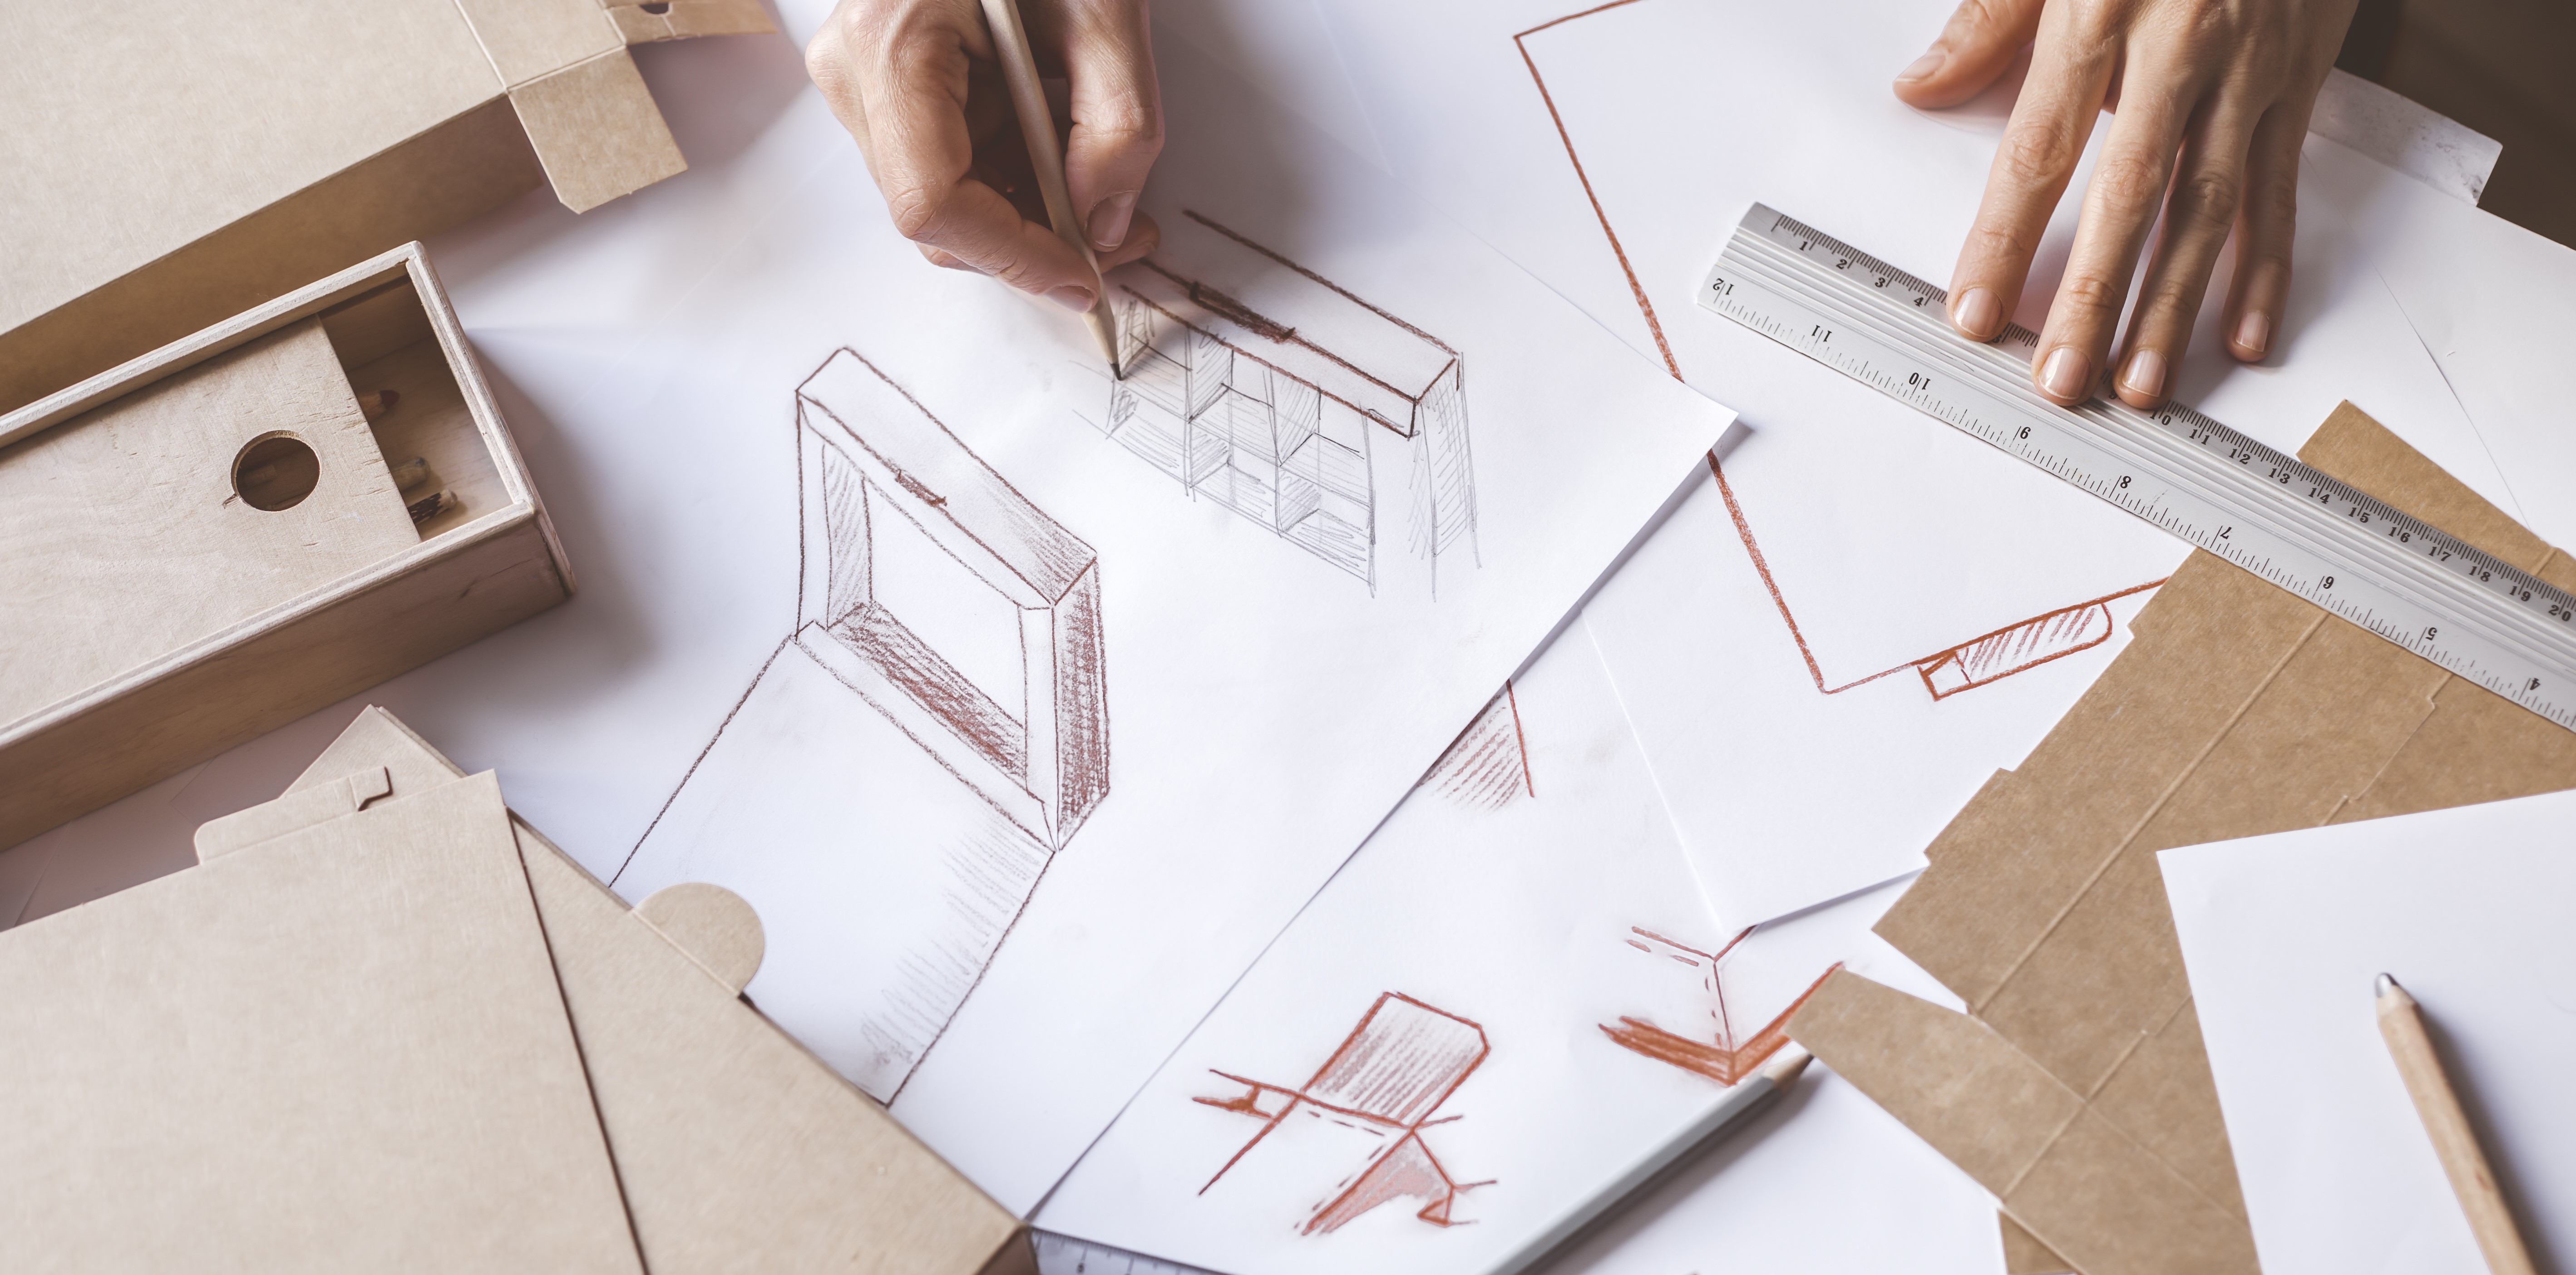 Blog, Understanding the Industrial Design Process, Melbourne Industrial Design, Product Design, Rapid Prototyping, Product Development, Manufacturing, Supply and Market Research